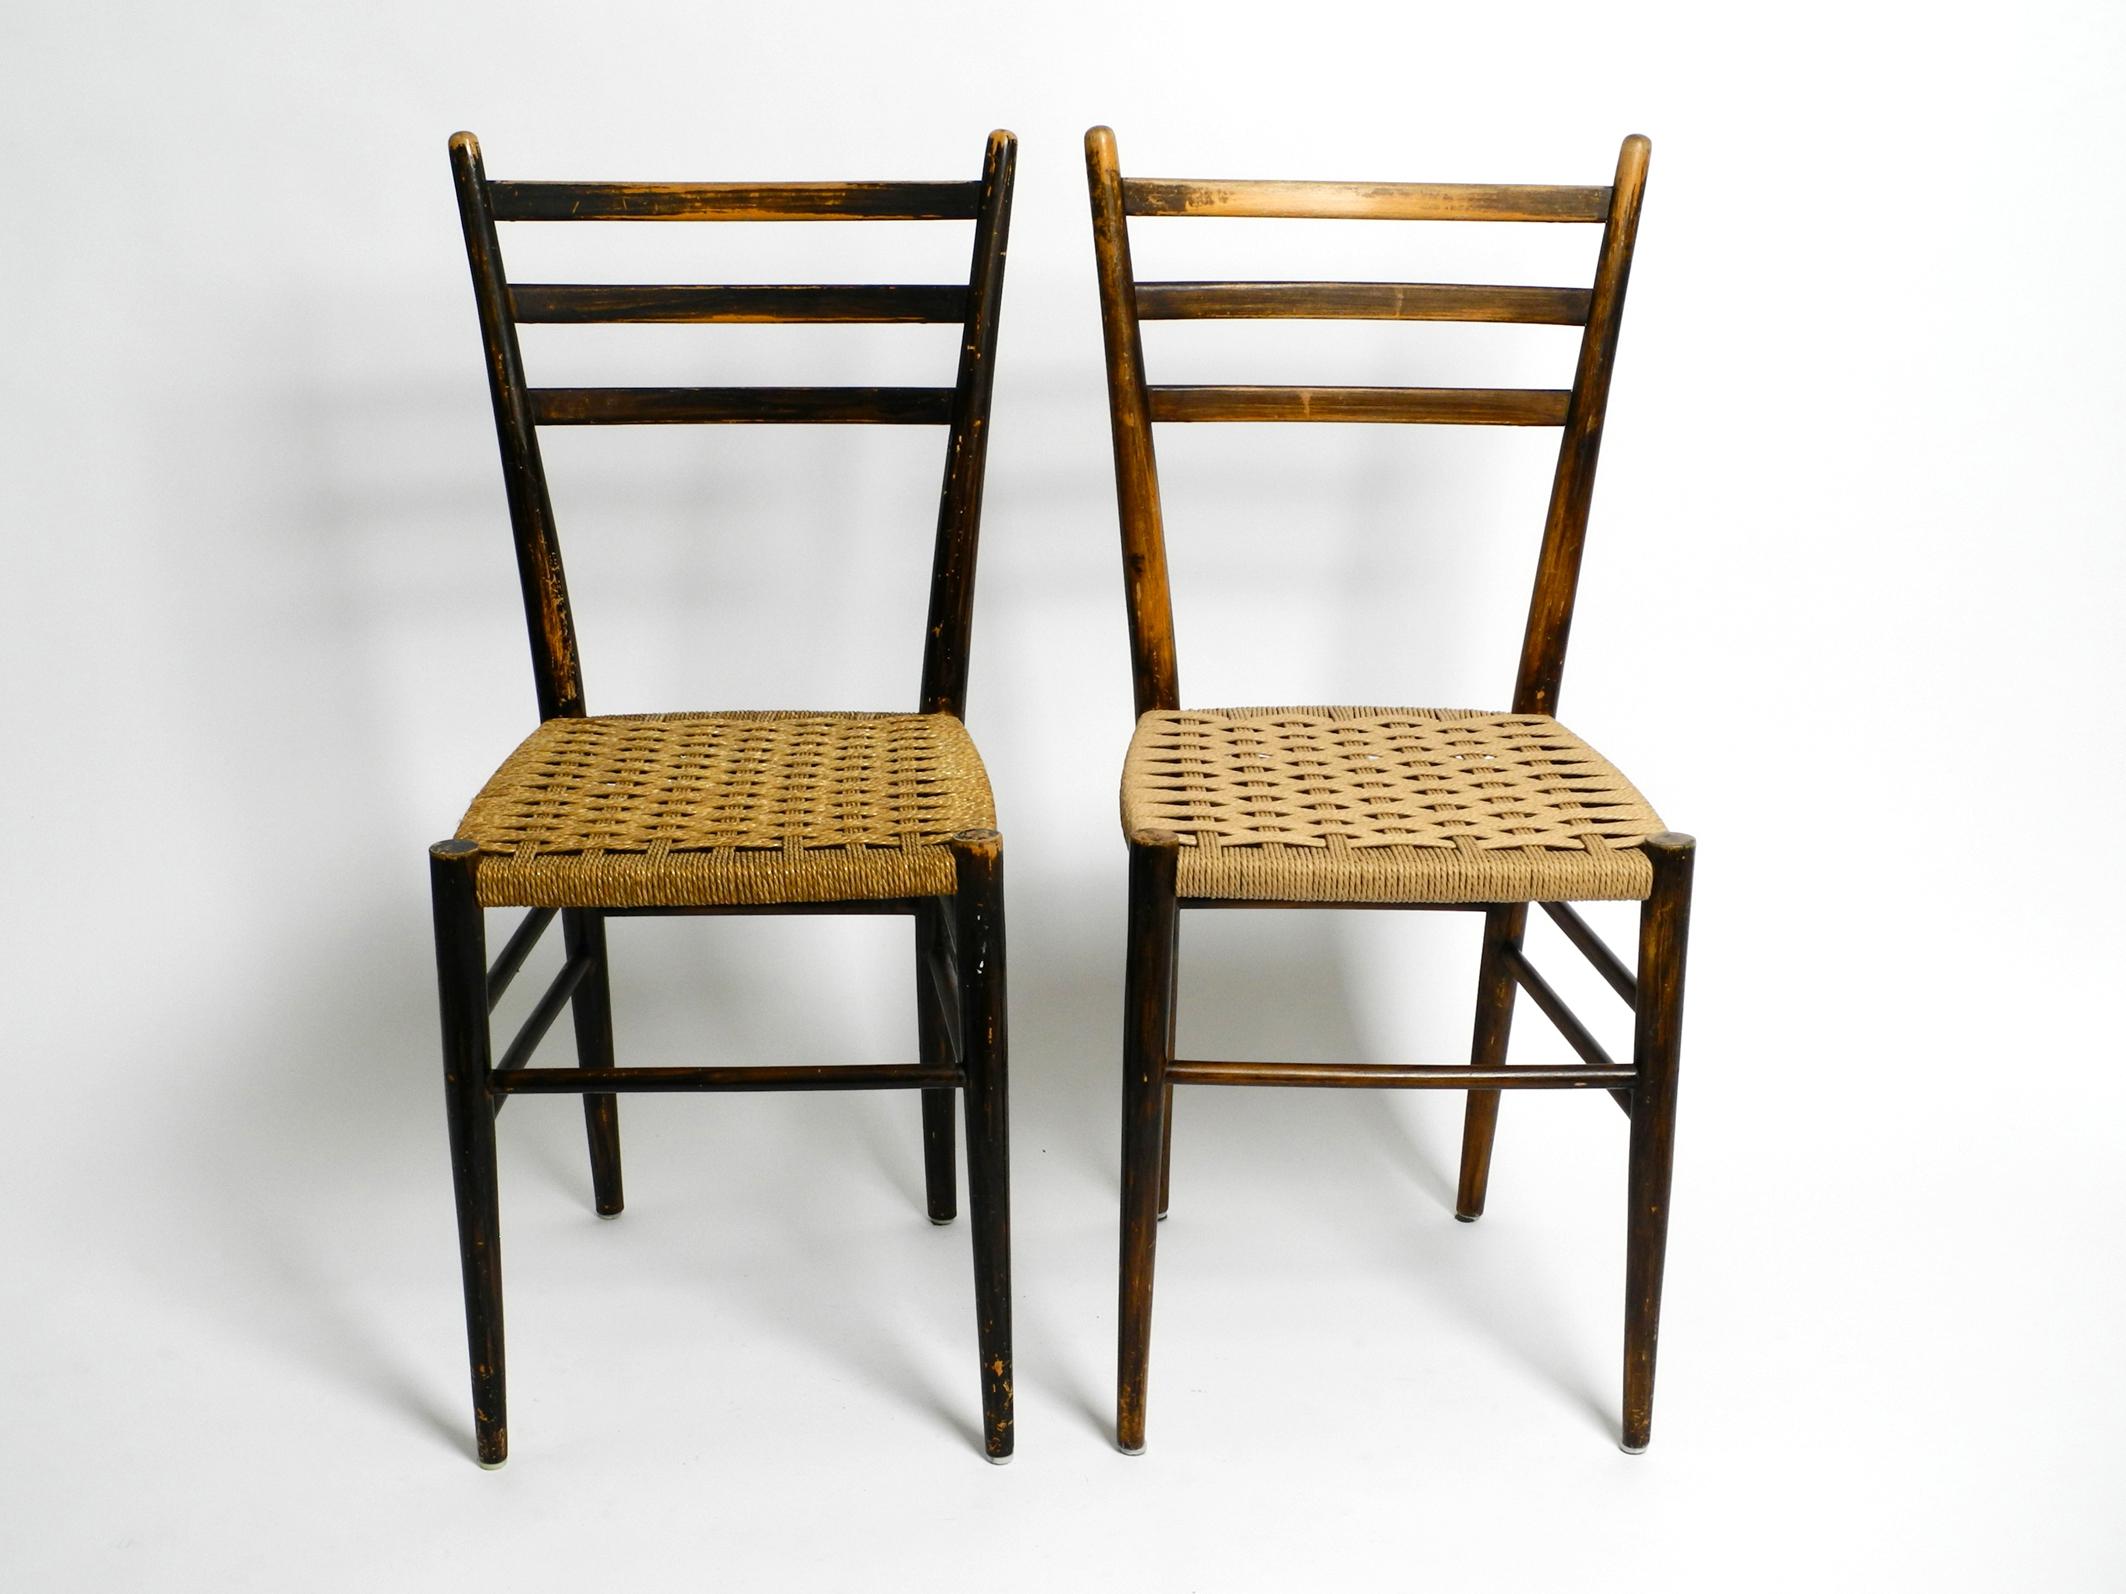 A pair of beautiful mid-century wooden dining chairs with woven cord seats.
Great minimalist design with a dreamlike patina. Made in Italy.
Very well preserved with no damage to the wooden frame and weave.
The braided cord on one chair has been